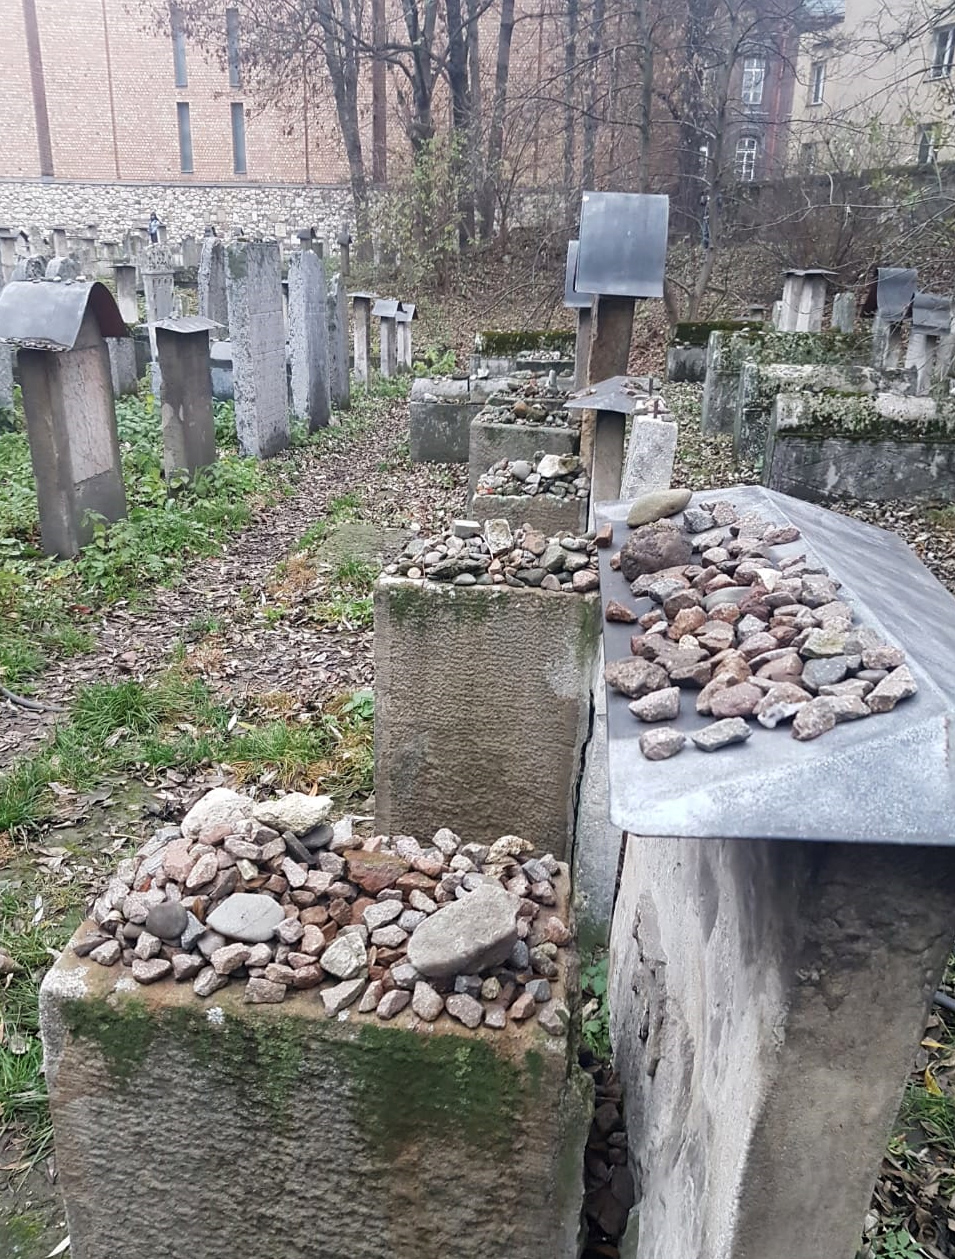 The Old Jewish Cemetery in Krakow, Poland